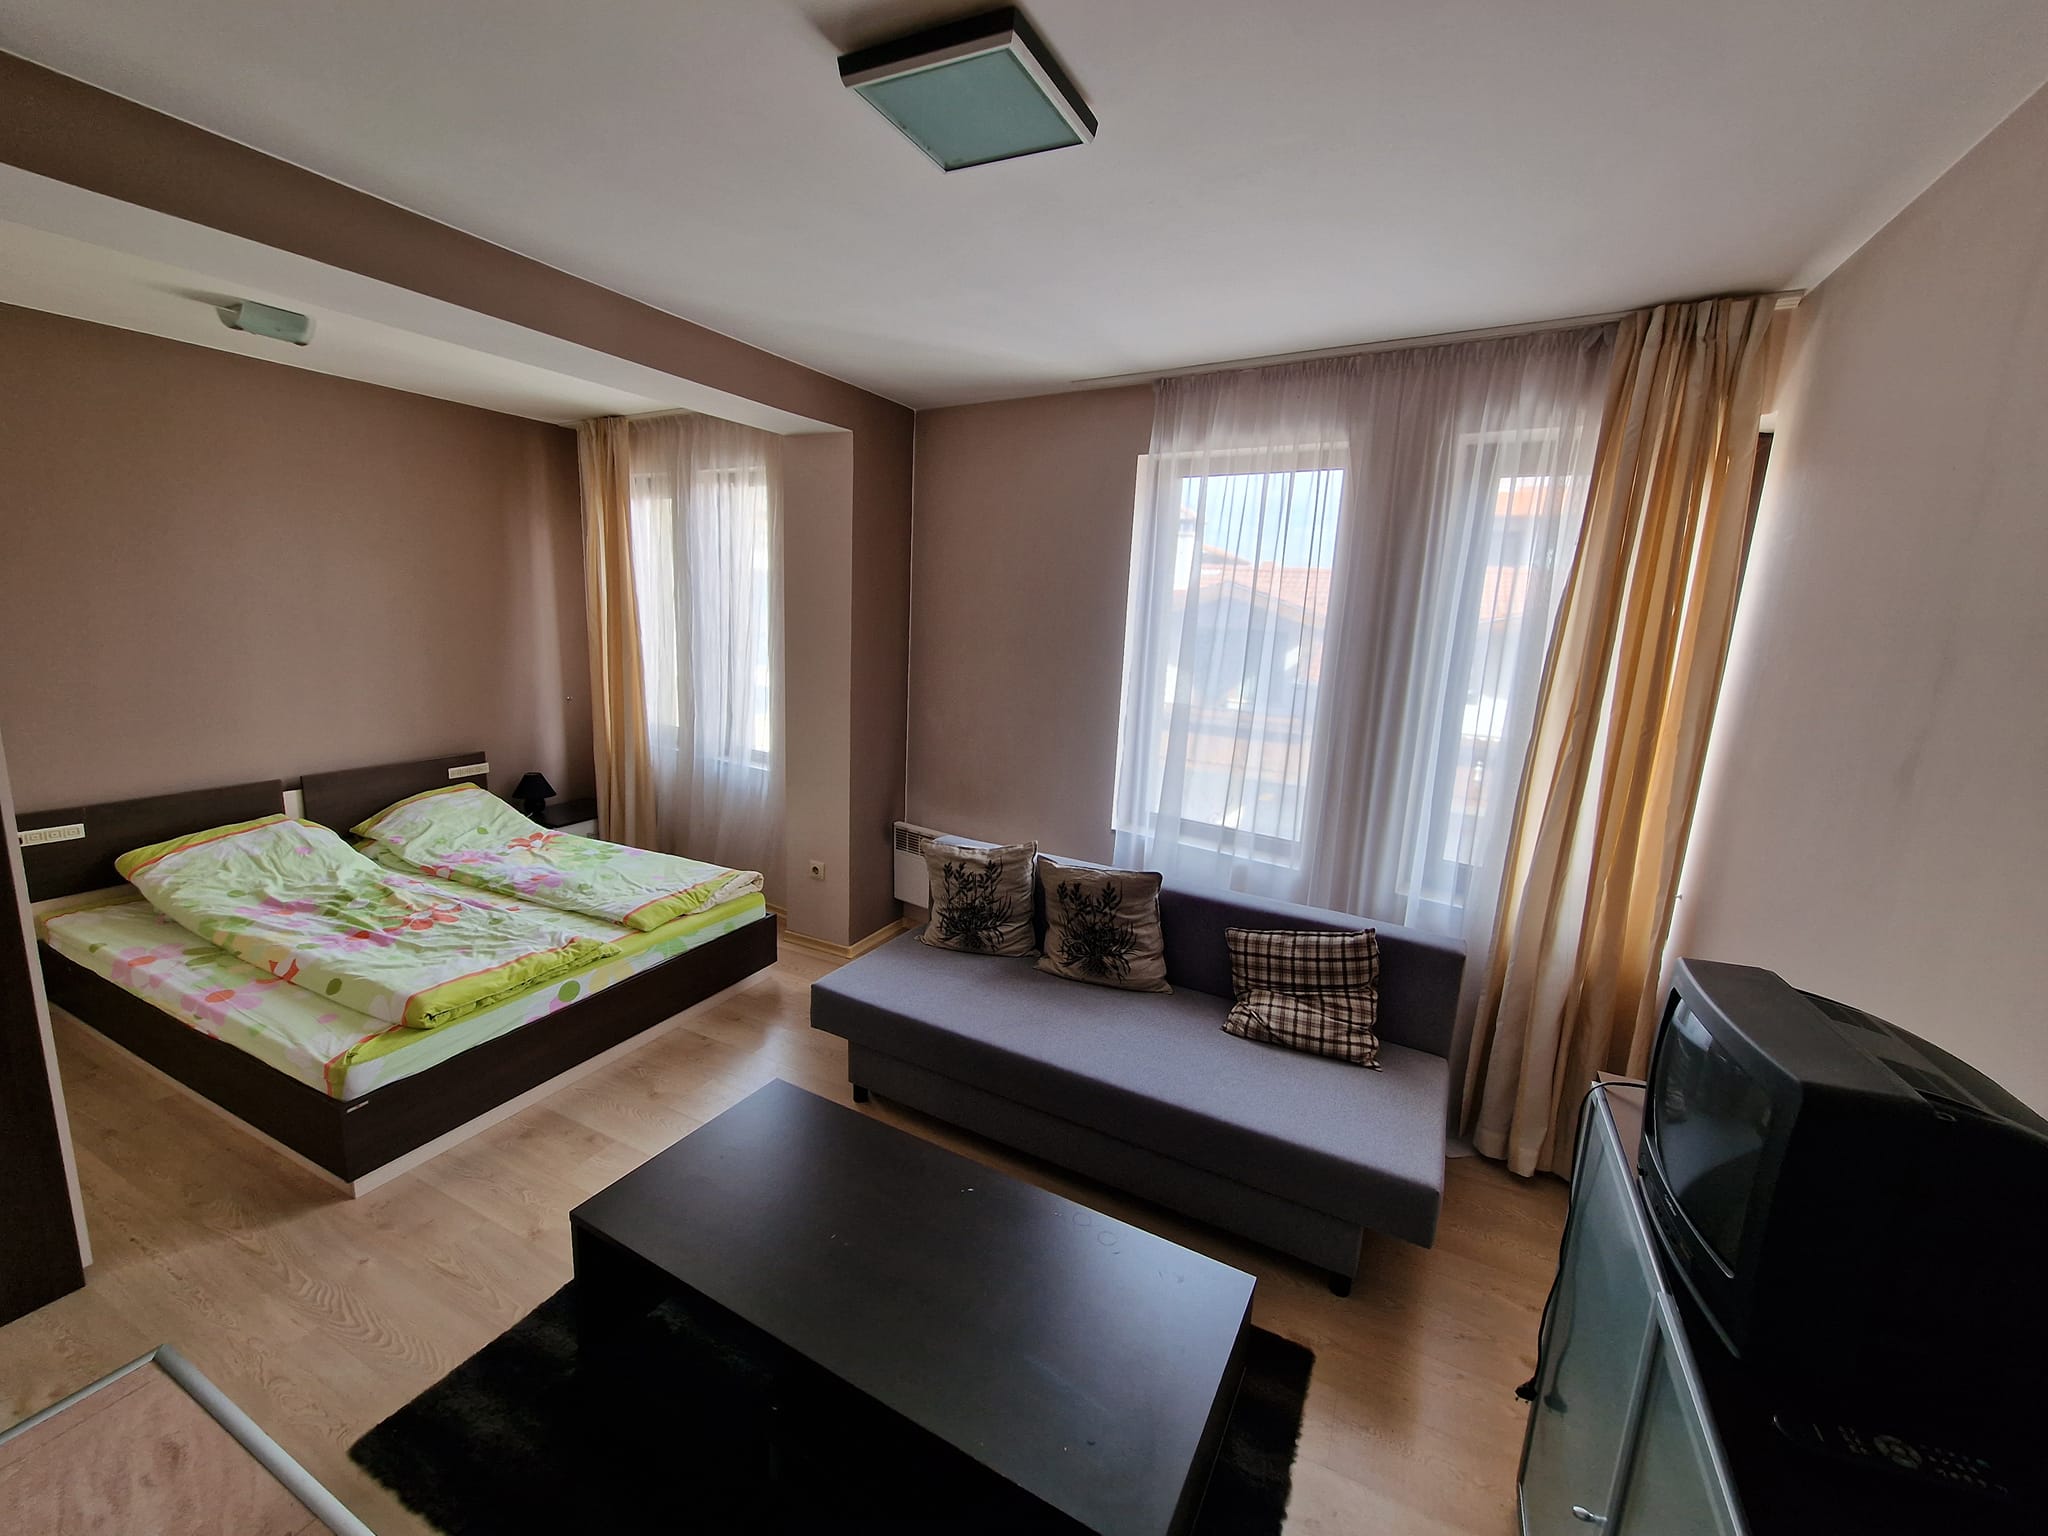 Bansko: Furnished studio in a residential building with a low maintenance fee